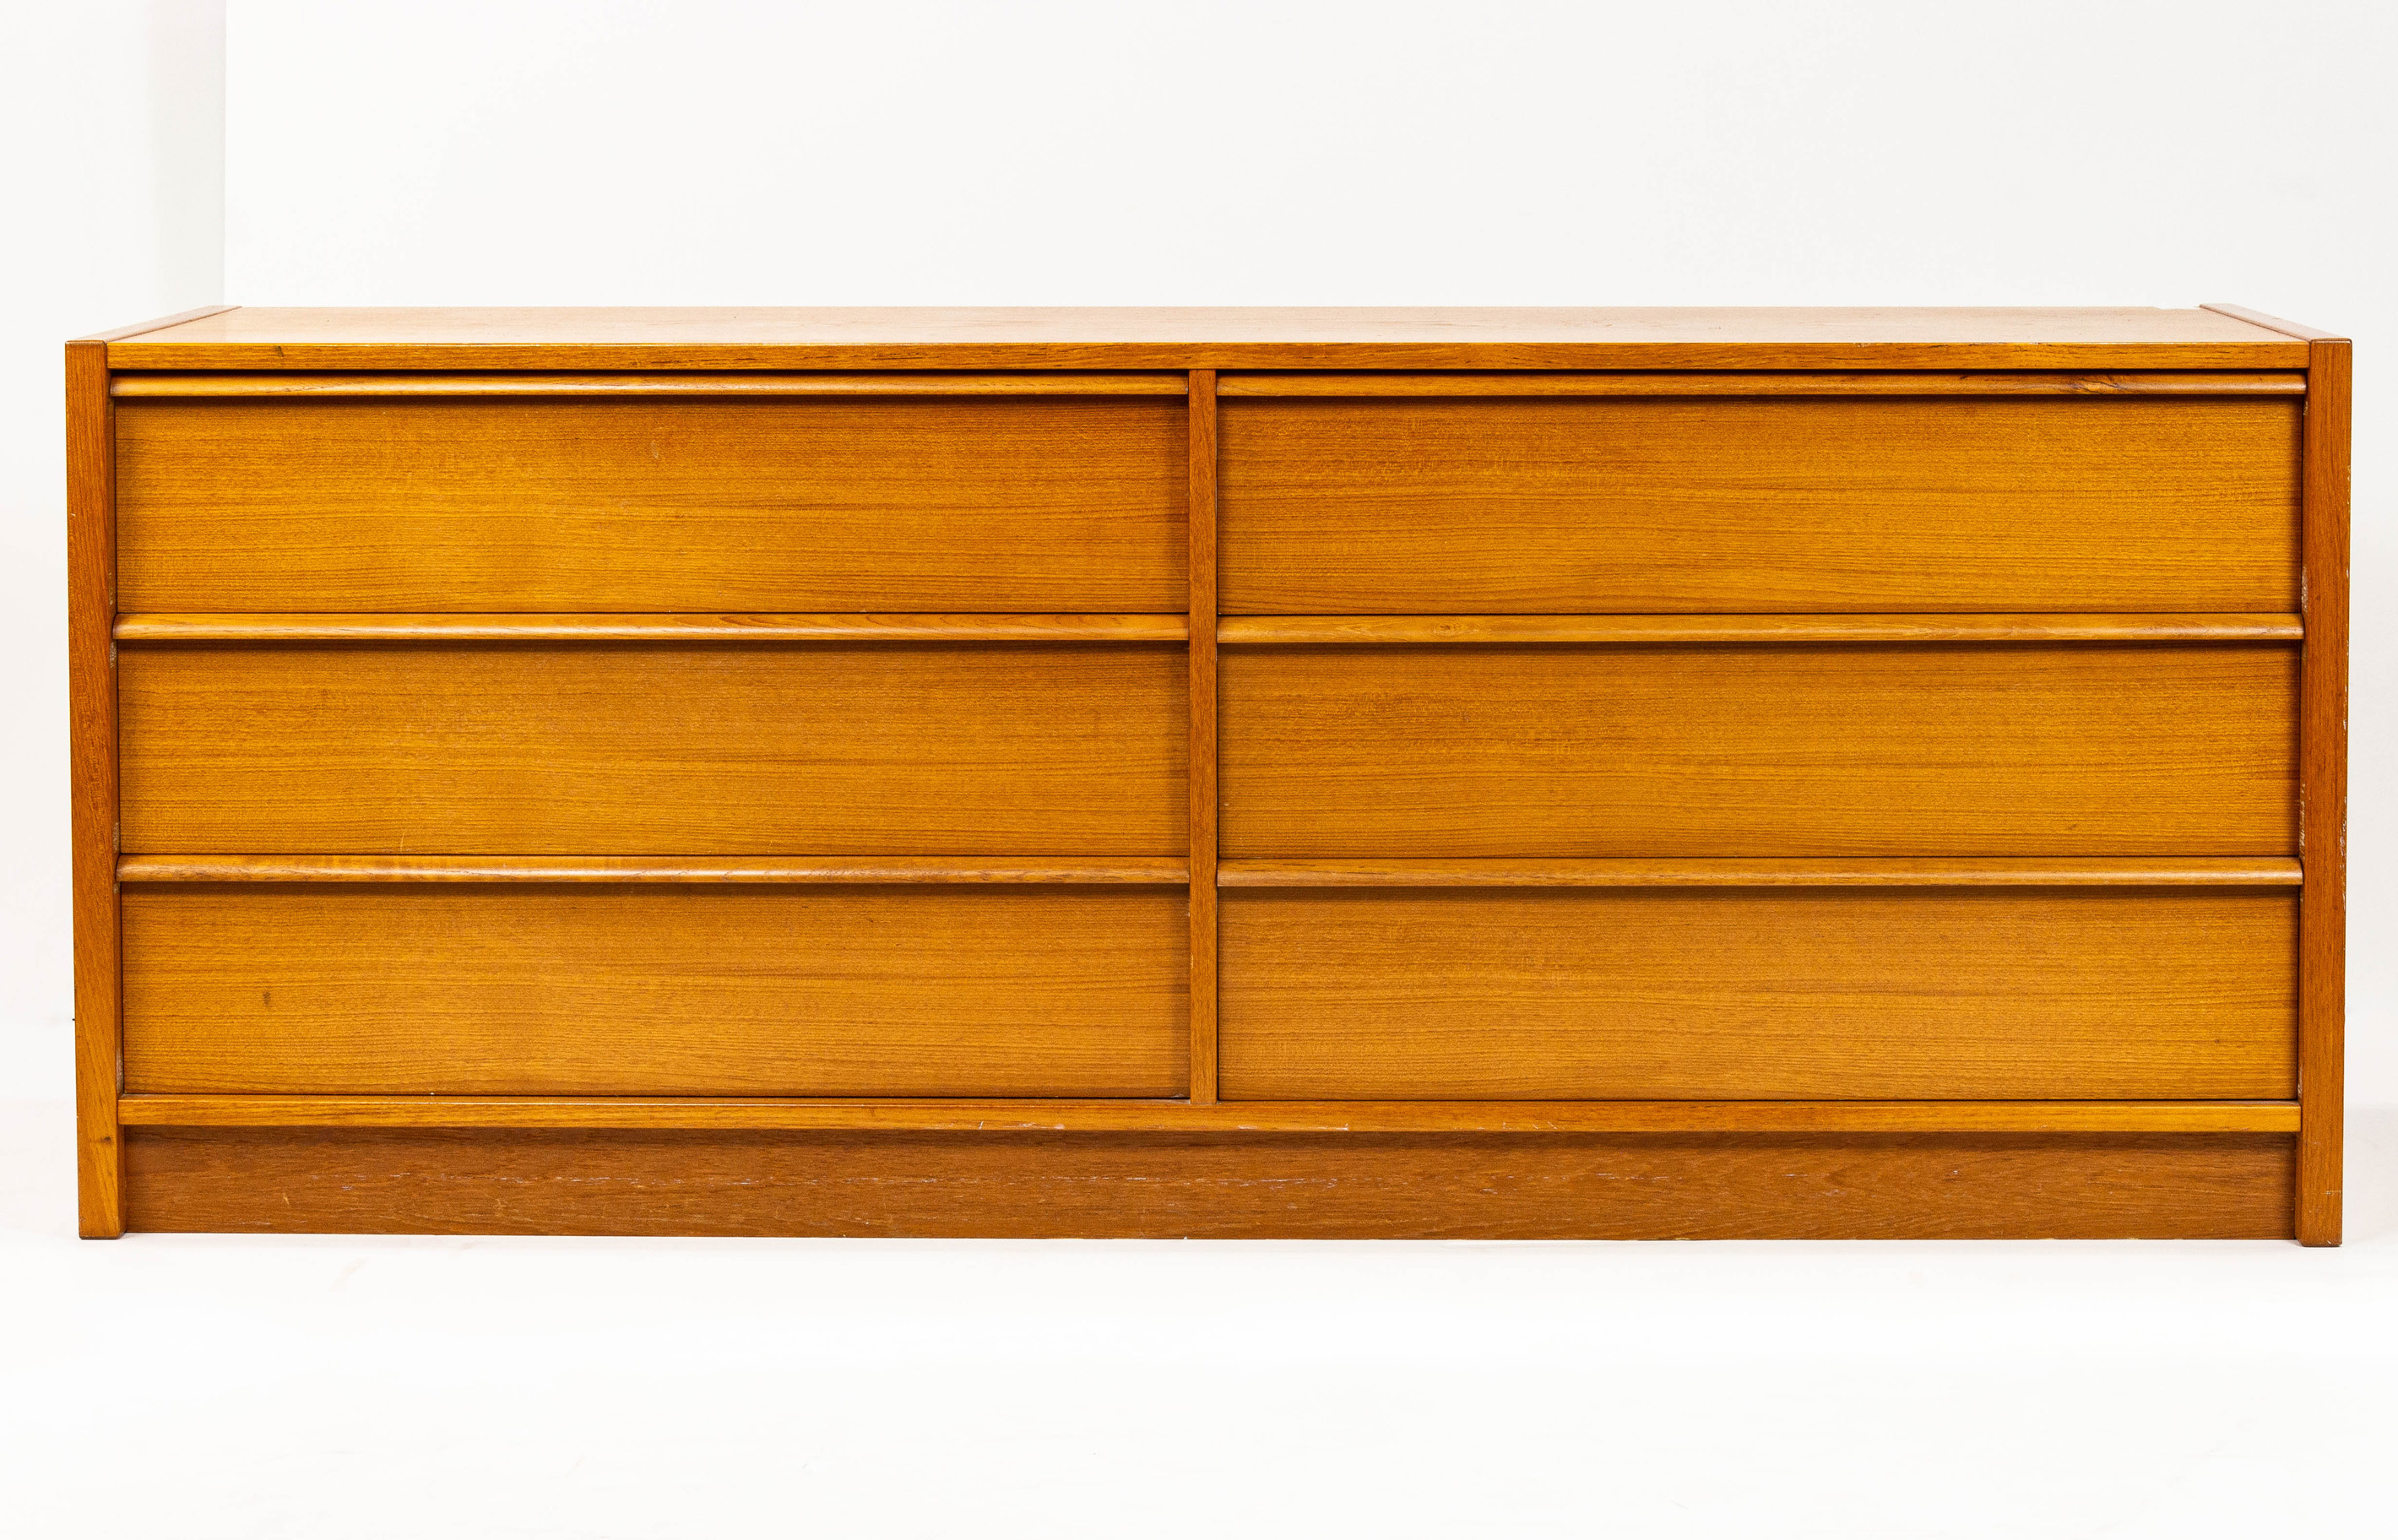 DANISH MODERN DOUBLE CHEST OF DAWERS 3a48ca